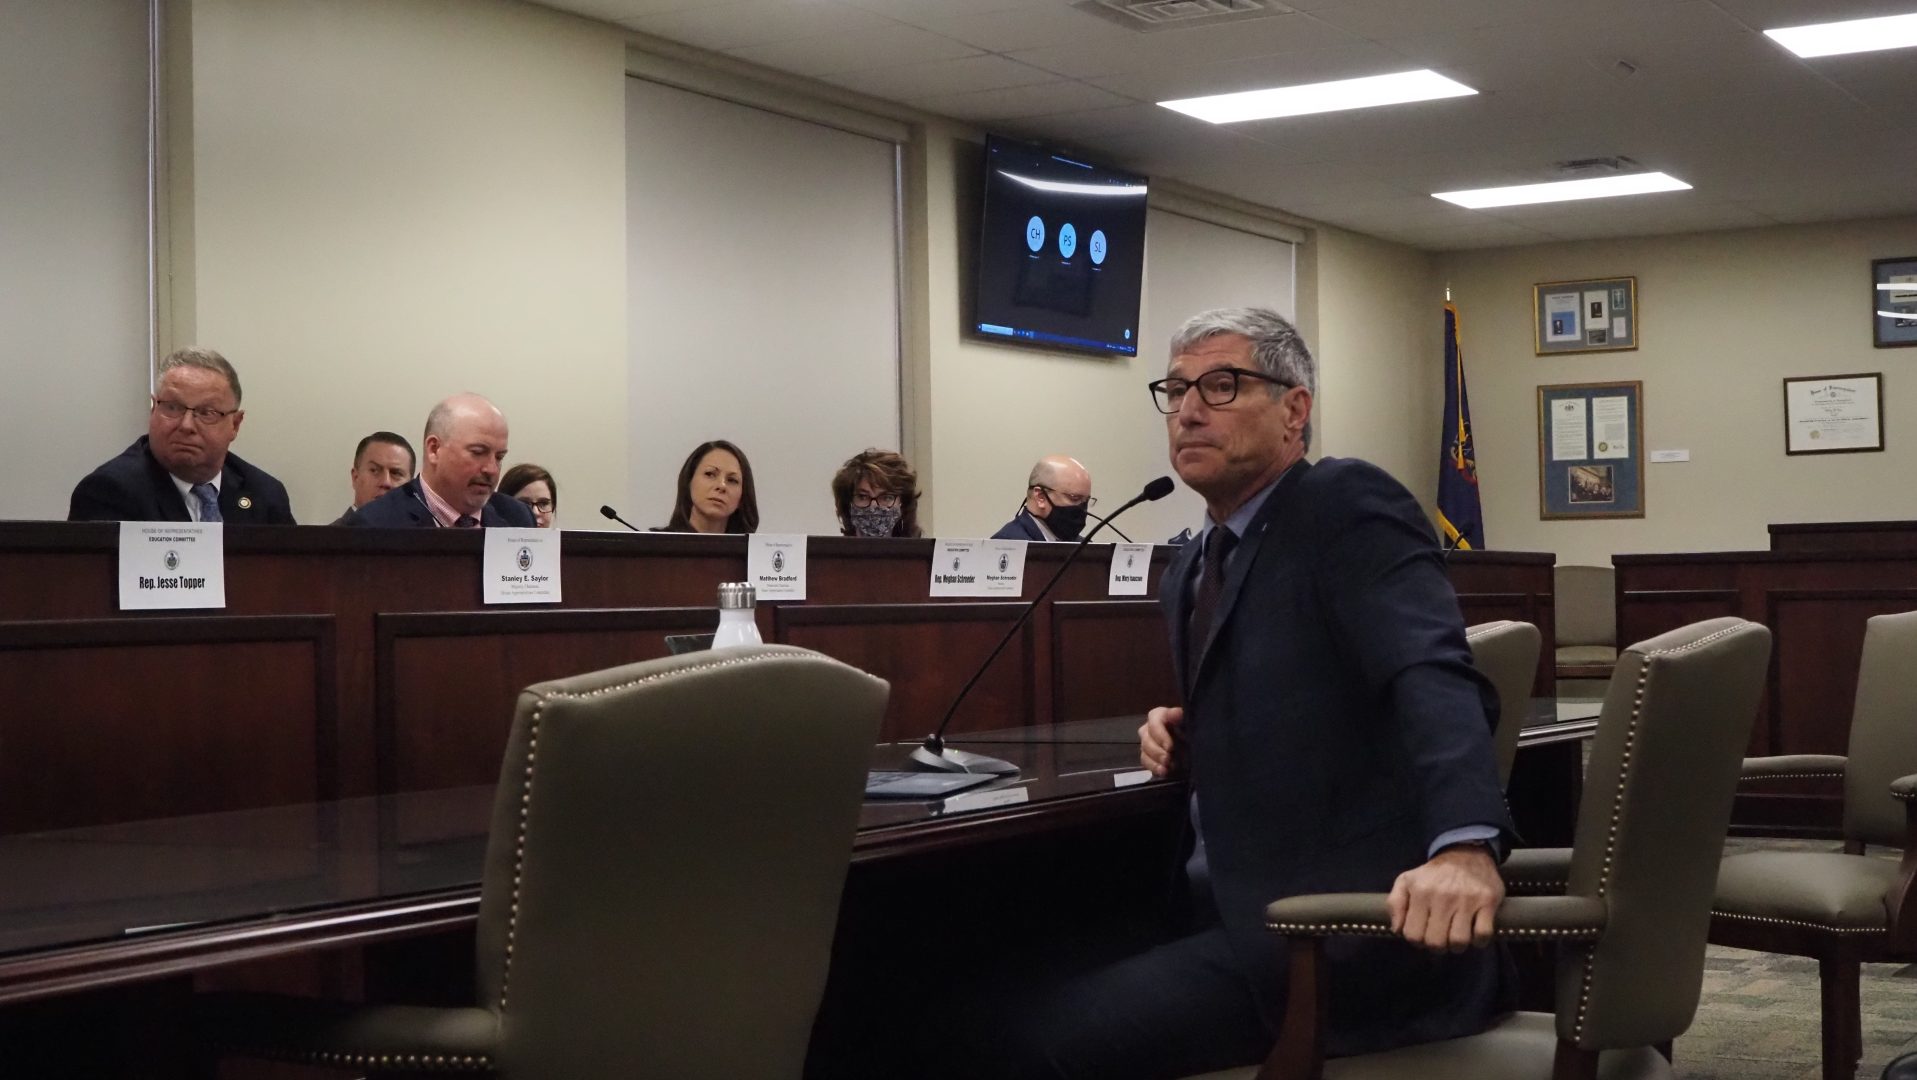 State System of Higher Education Daniel Greenstein is questioned by lawmakers of the House Appropriations and Education committees at a hearing in Harrisburg on Oct. 27, 2021